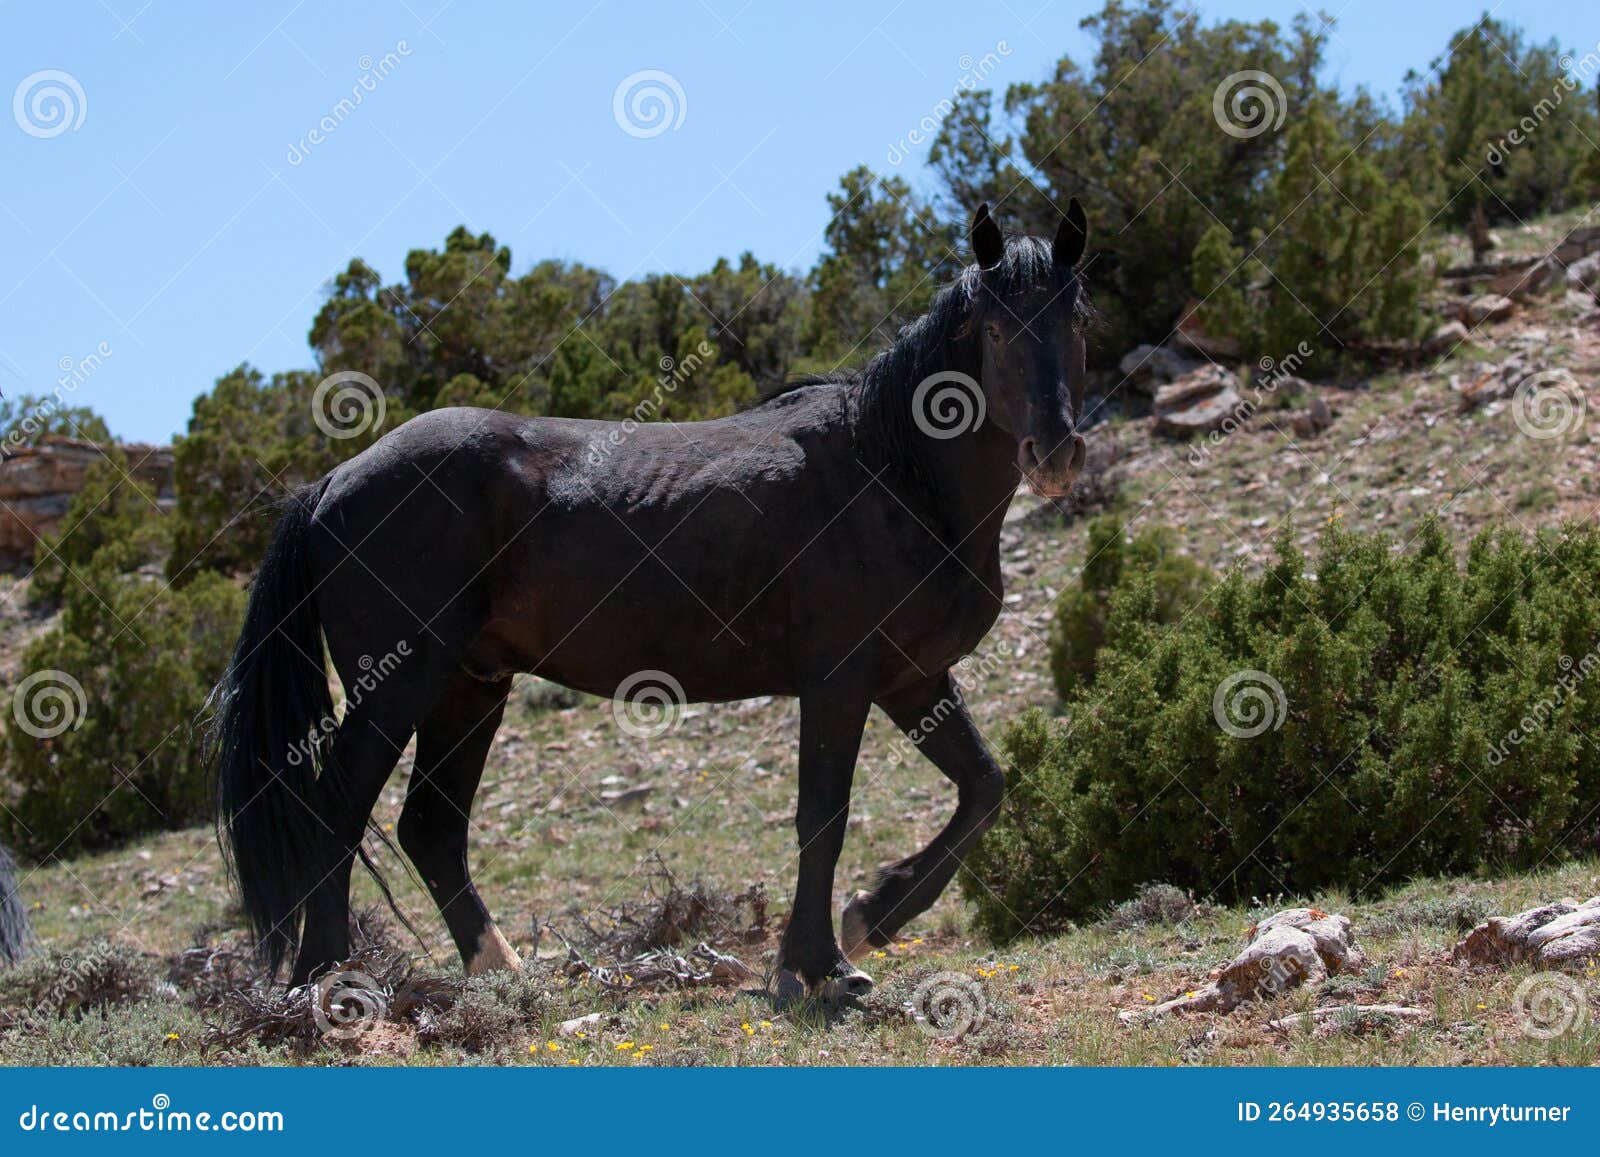 lone black stallion wild horse on mineral lick hillside on pryor mountain in the western usa